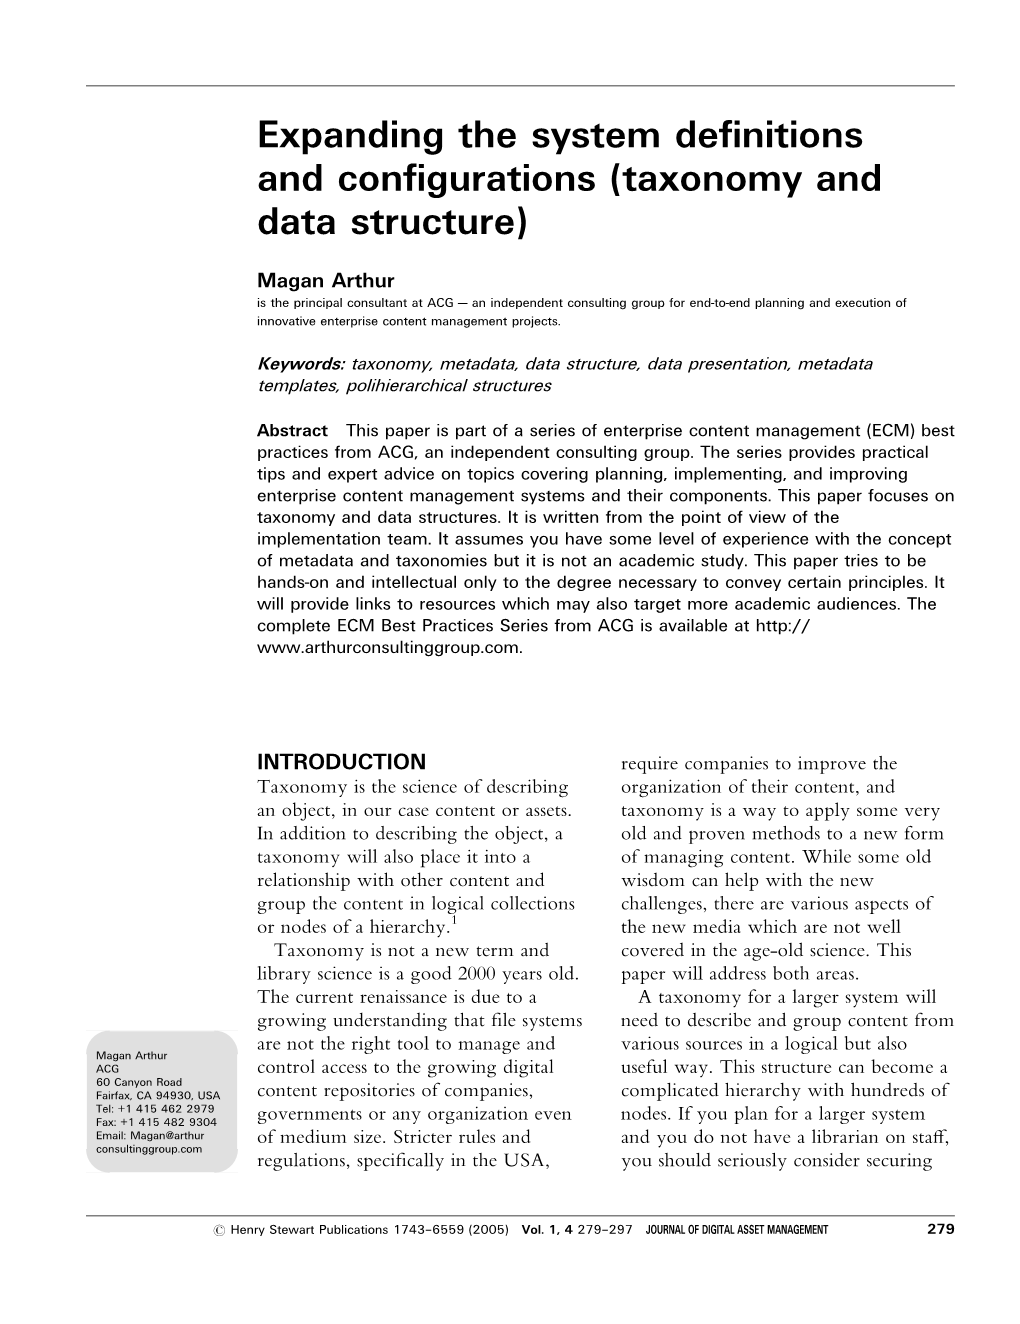 Expanding the System Definitions and Configurations (Taxonomy and Data Structure)